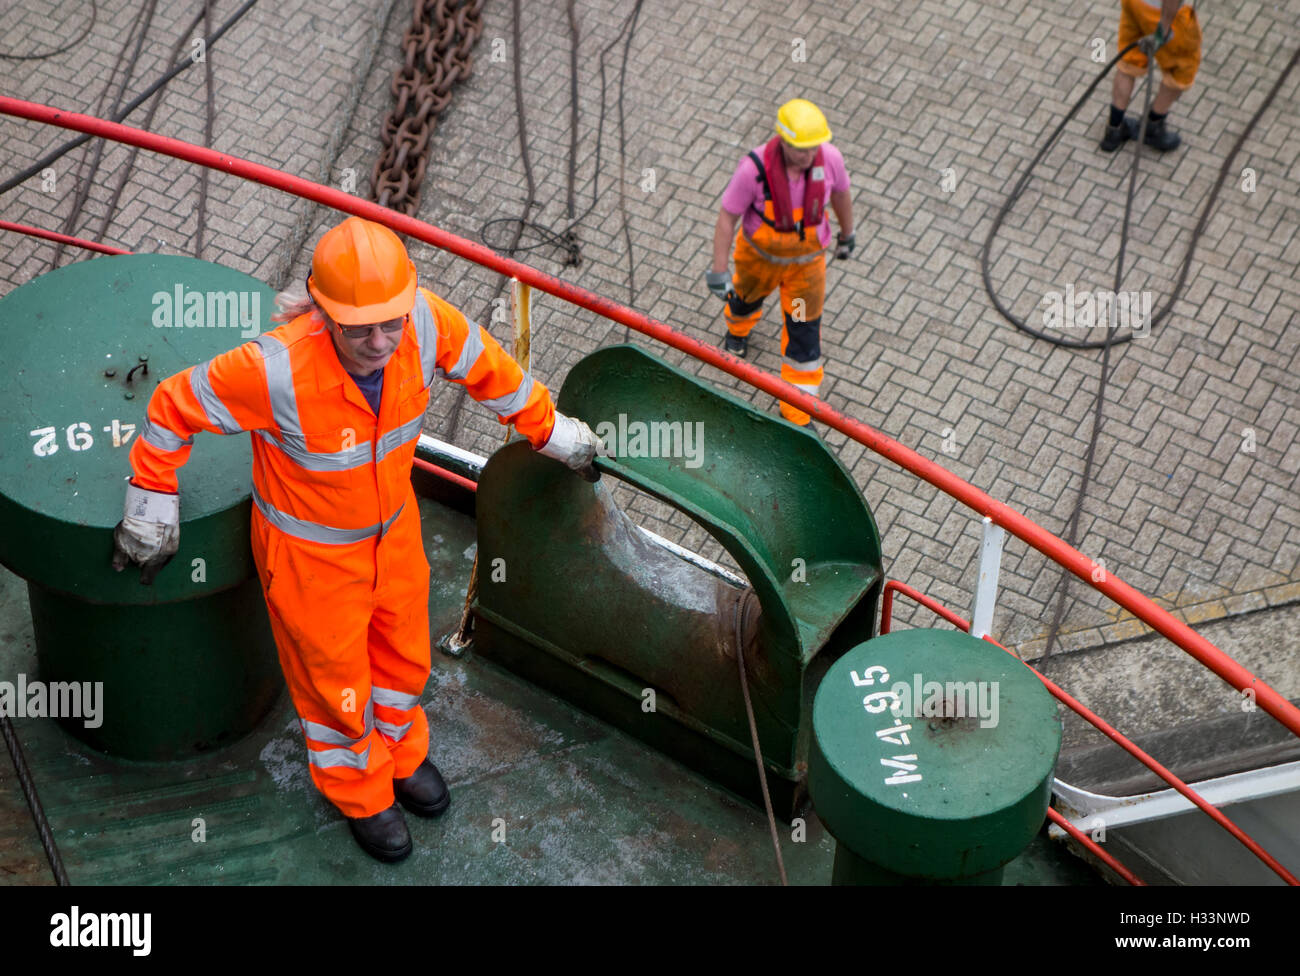 Ship's crew member in orange overall and dockworkers helping to moor ferry boat in seaport's dock Stock Photo